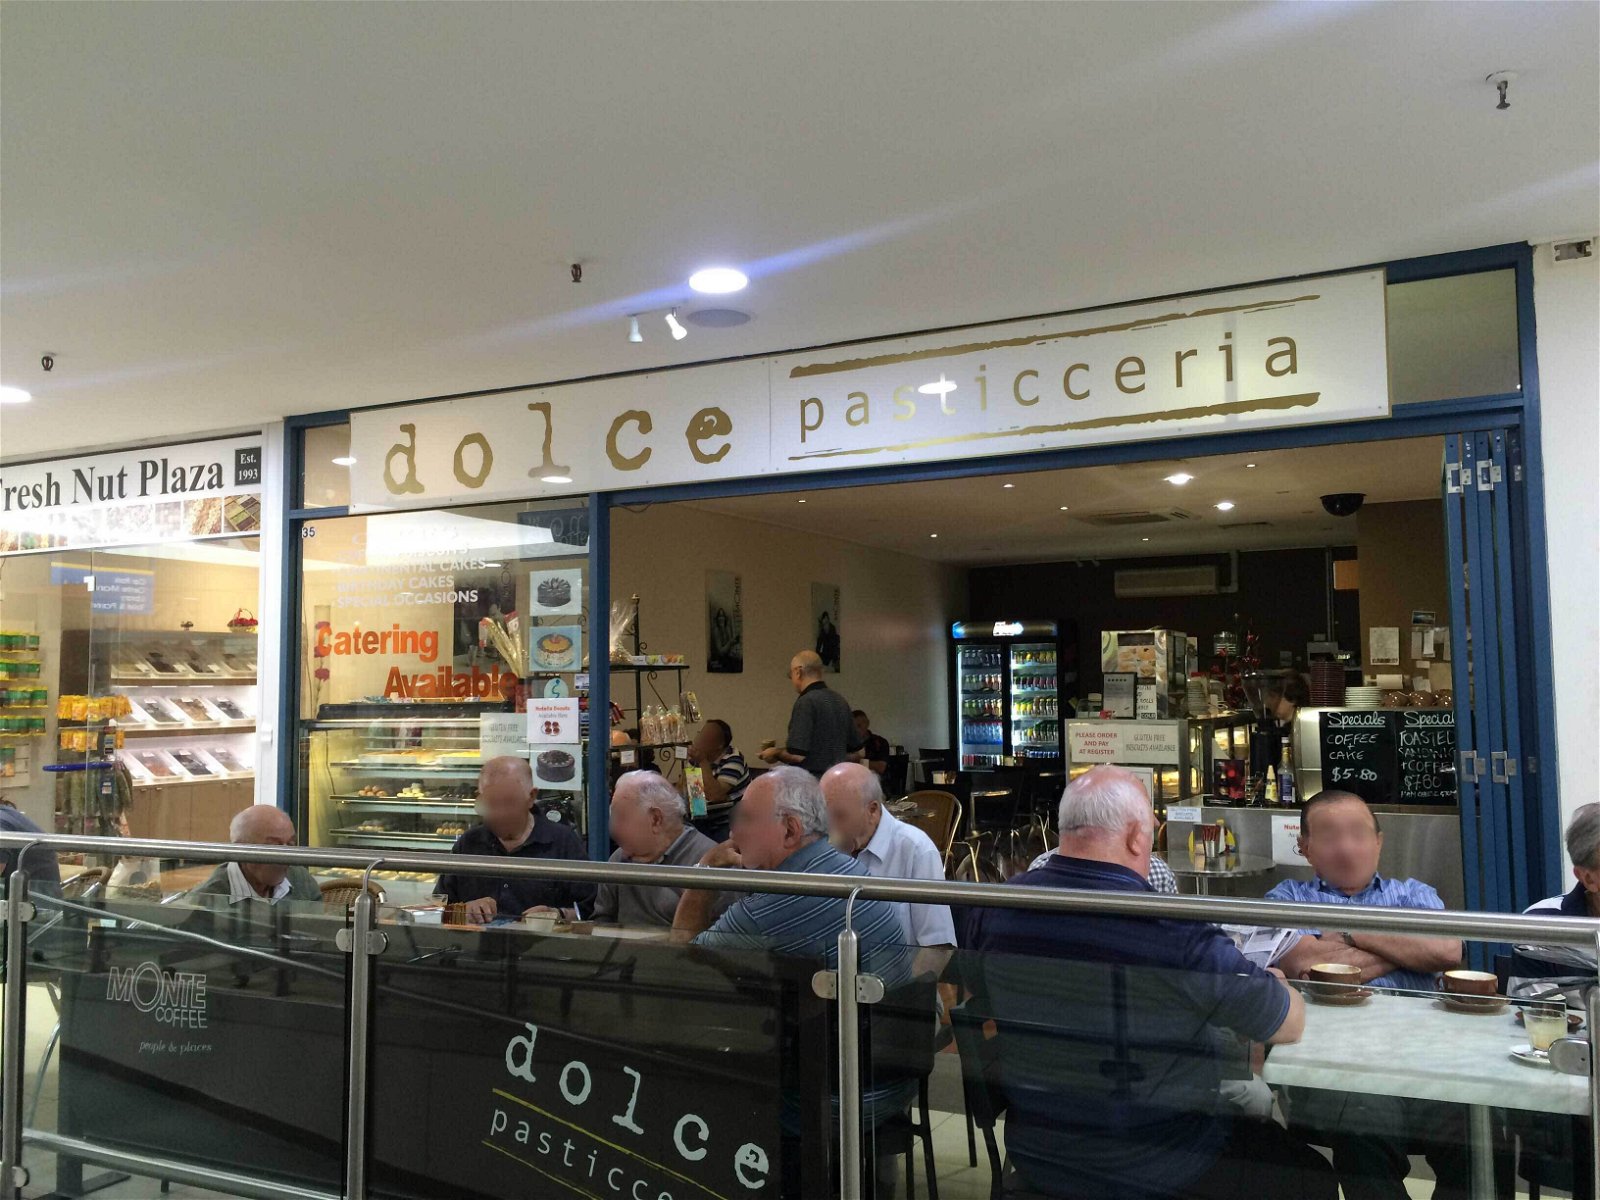 Dolce Pasticceria - Accommodation Find 0